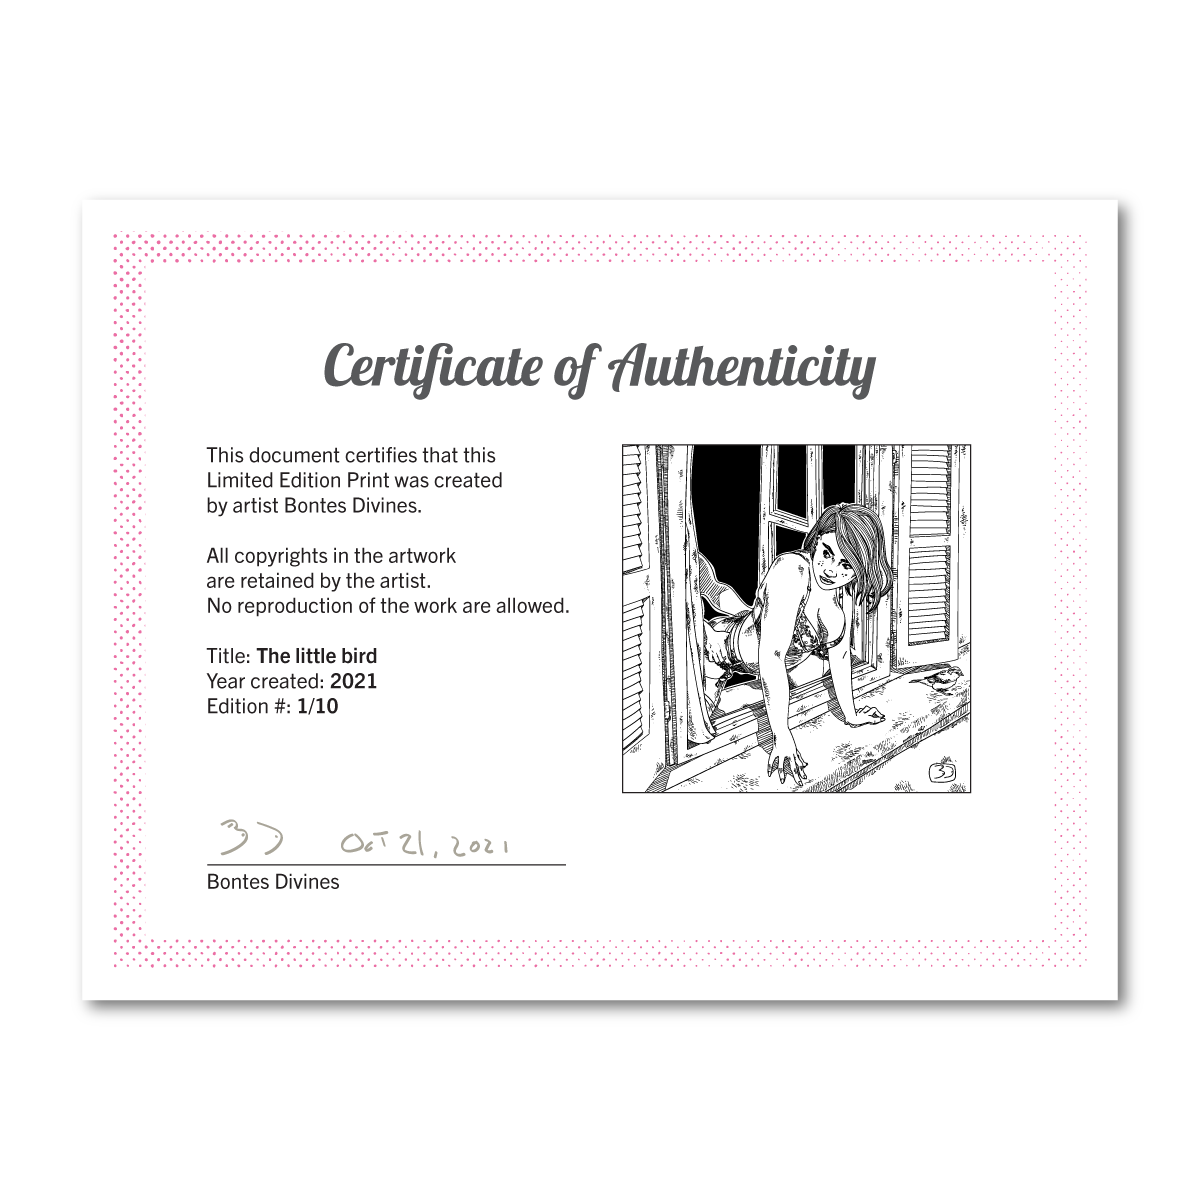 The little bird limited edition certificate of authenticity